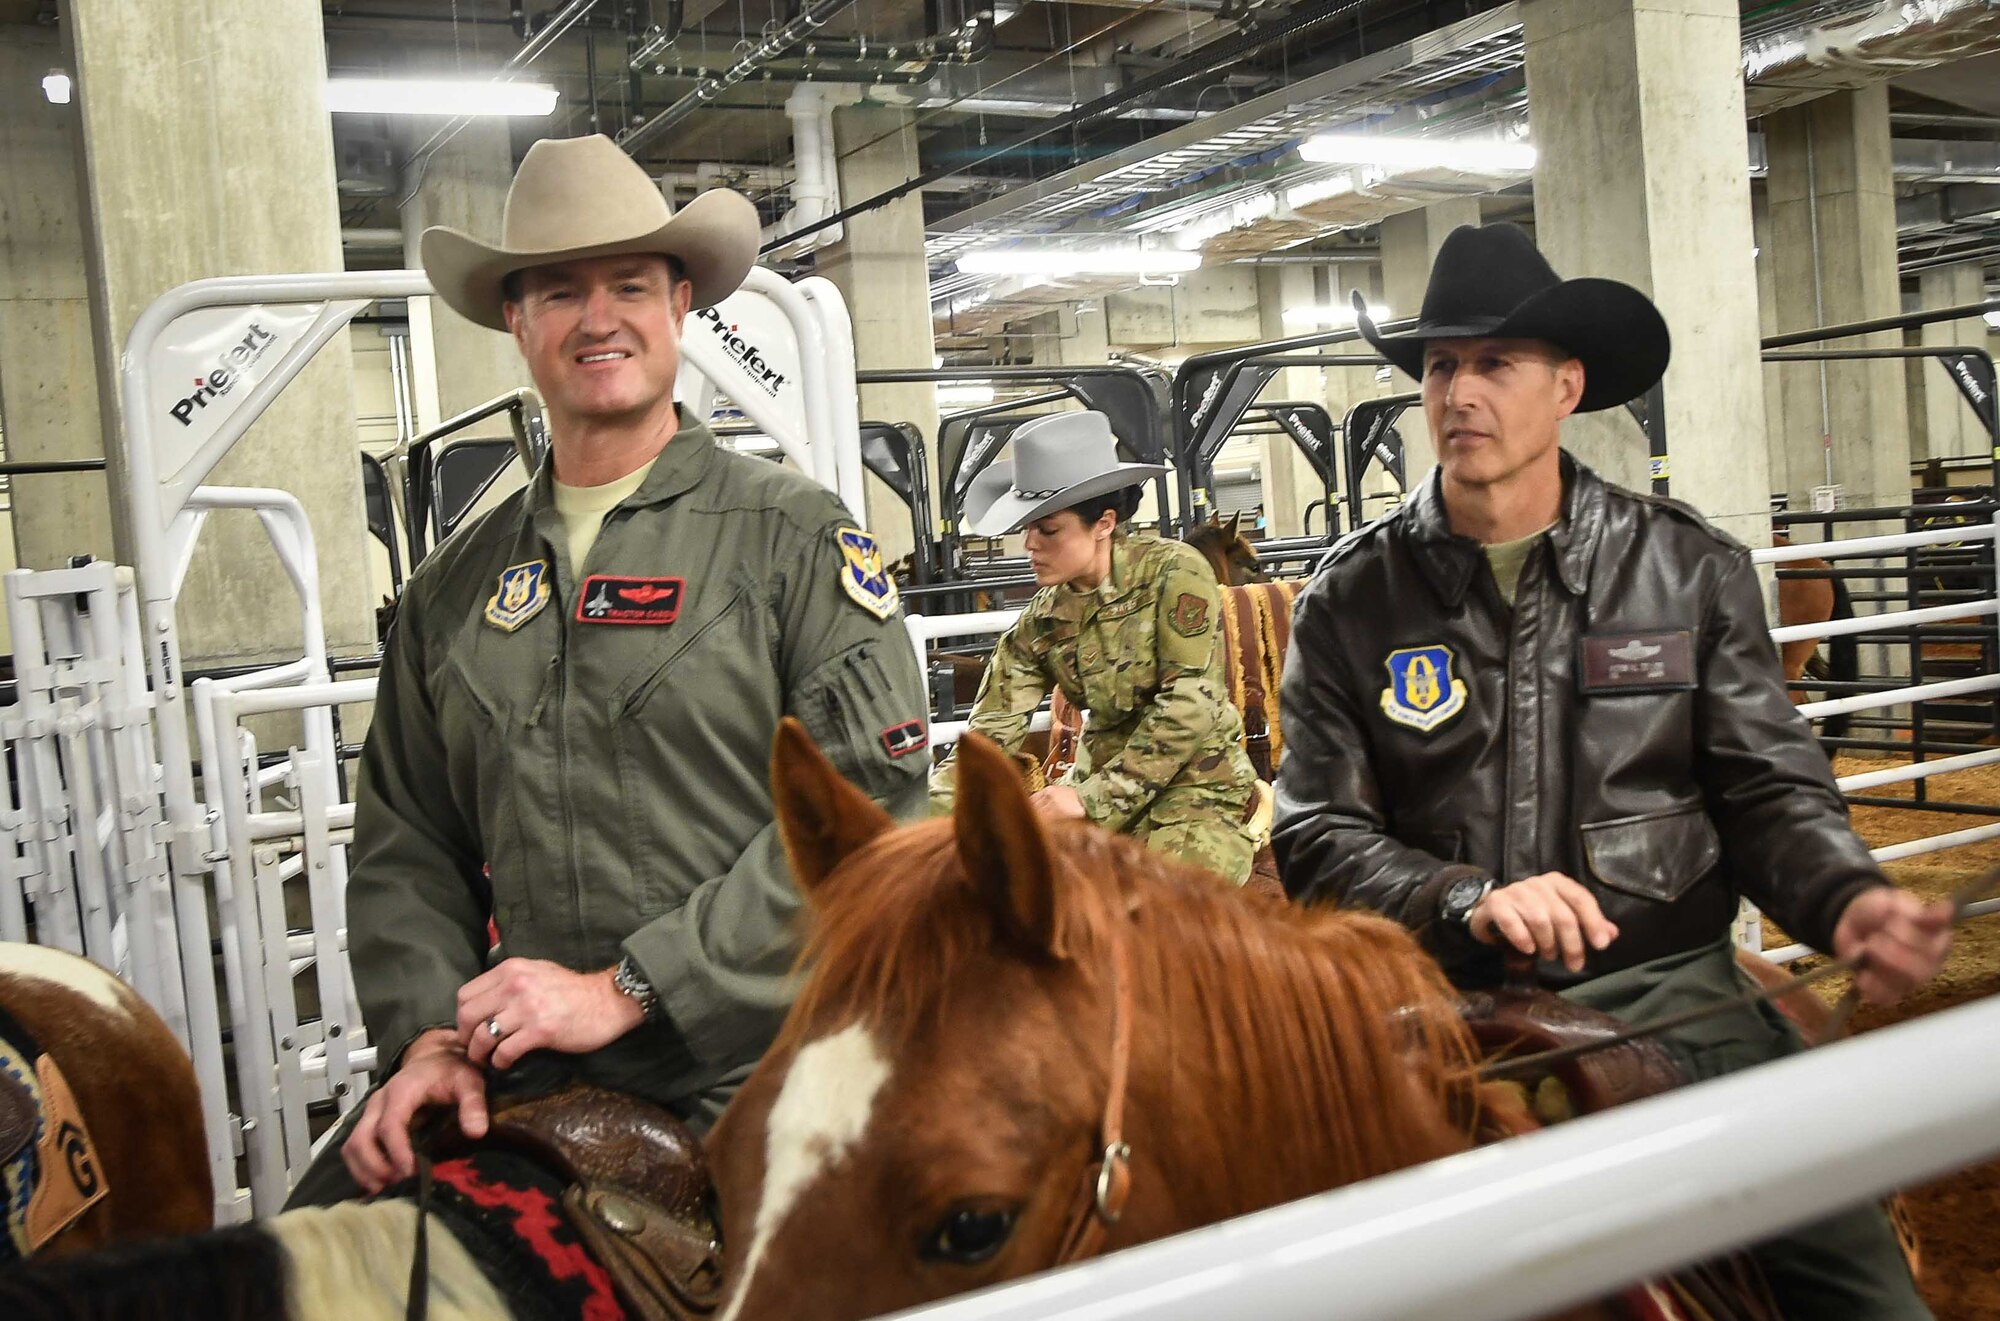 301st Fighter Wing Vice Commander Col. Randall Cason, Senior Airman Brooke Pirrone, 301 FW tactical aircraft maintenance crew chief, and 301 FW Director of Staff Col. Kevin Zeller represent the wing riding in the Grand Entry at the Fort Worth Stock Show and Rodeo at Dickie’s Arena on February 3, 2020. The 301 FW has been honored to ride in the procession of Military Appreciation Day since 2012. (U.S. Air Force Photo by Master Sgt. Jeremy Roman)